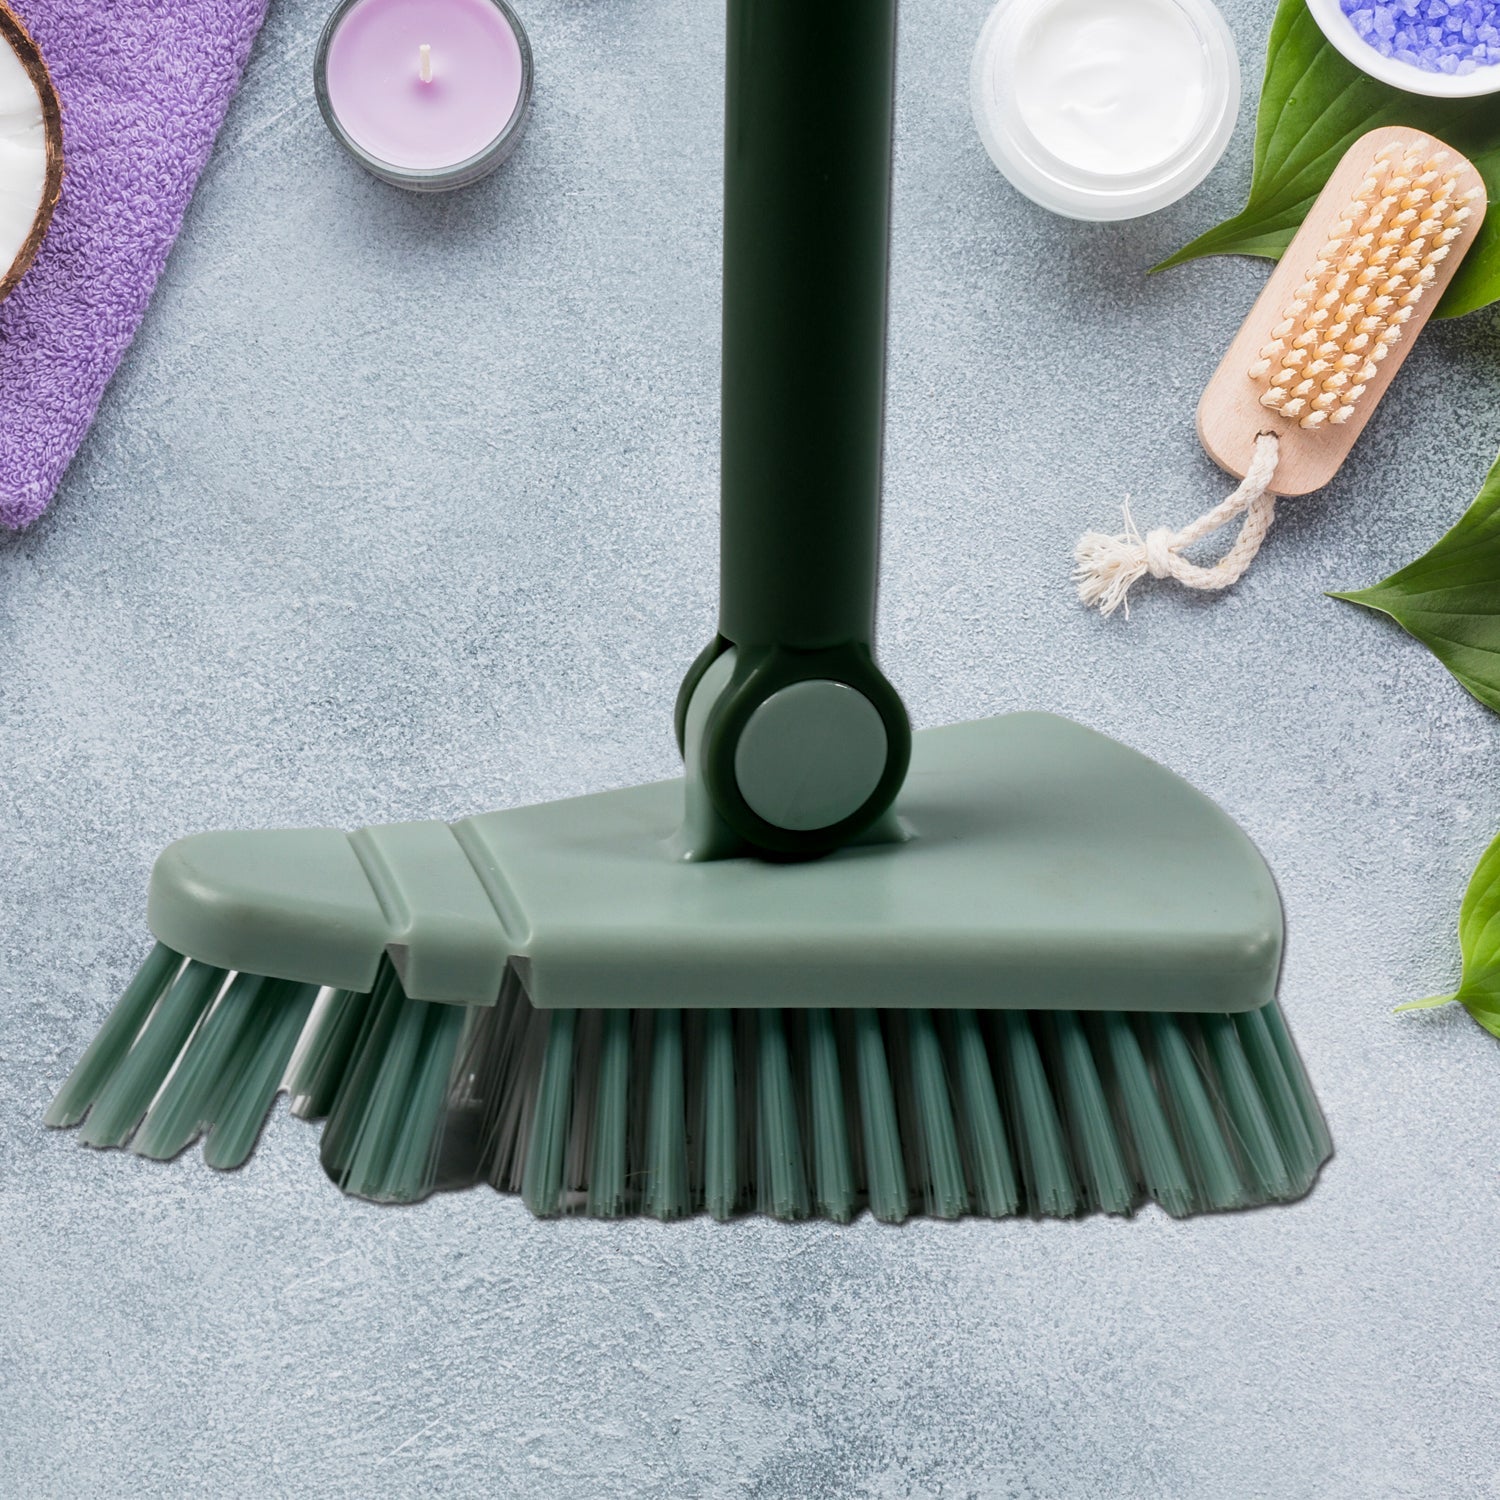 7878 Retractable Long Handle rotatable Floor Brush, with Sturdy Rotating Head, with Removable Triangular Head Cleaning Brush, Suitable for Home Bathroom and Kitchen. DeoDap